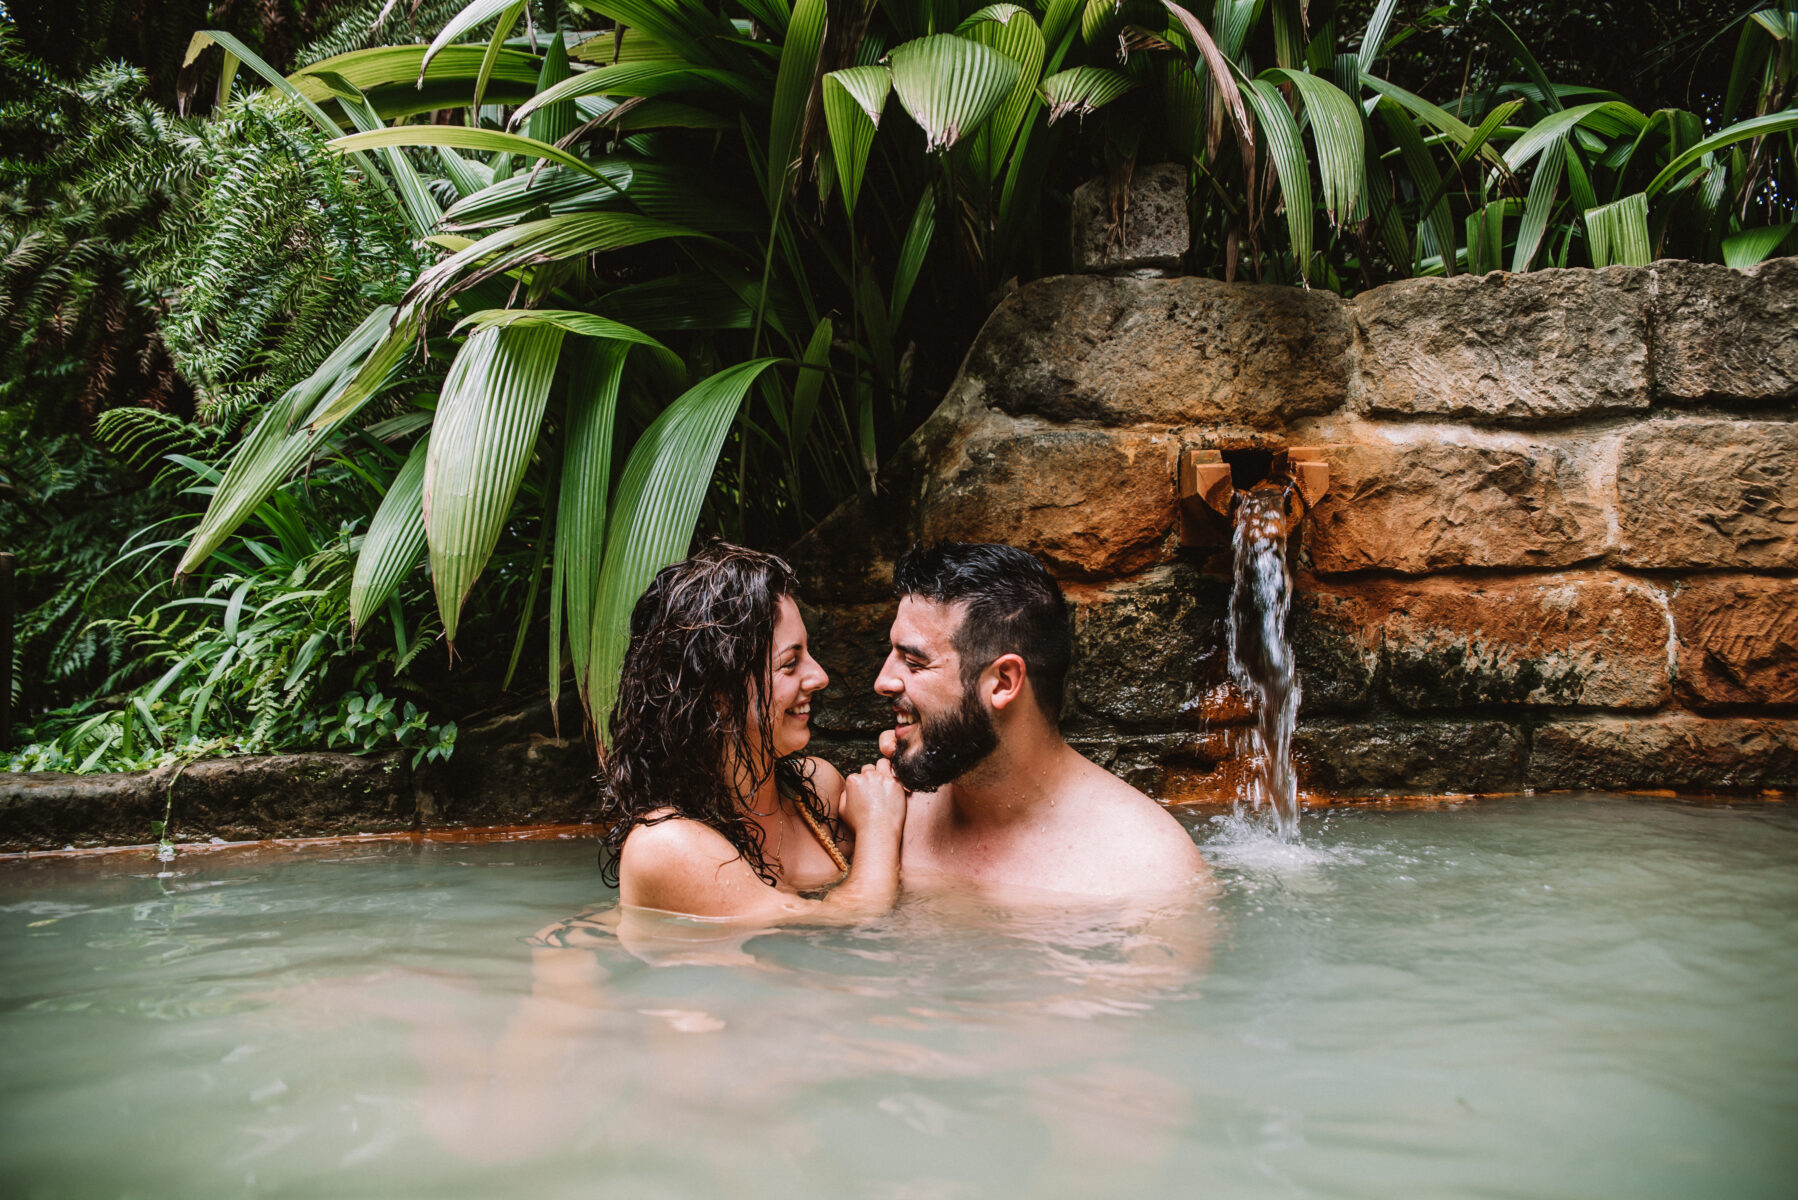 Jacuzzi Parque Terra Nostra – Love Is In The Air